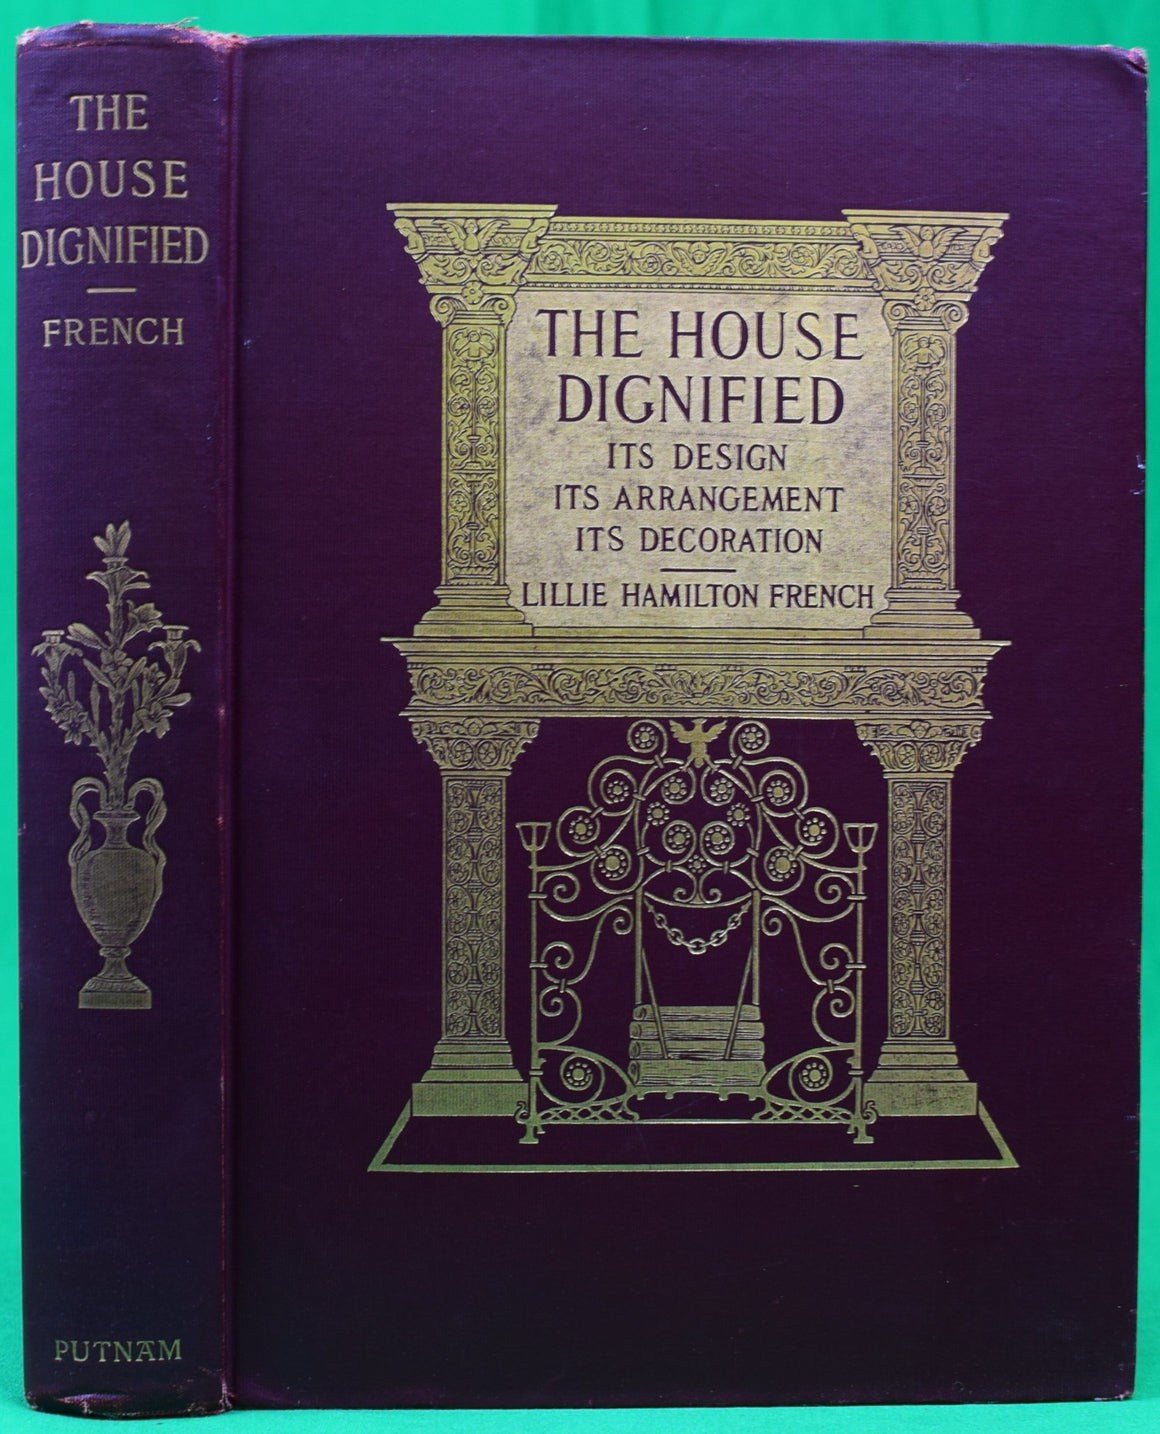 "The House Dignified: Its Design, Its Arrangement, Its Decoration" 1908 FRENCH, Lillie Hamilton